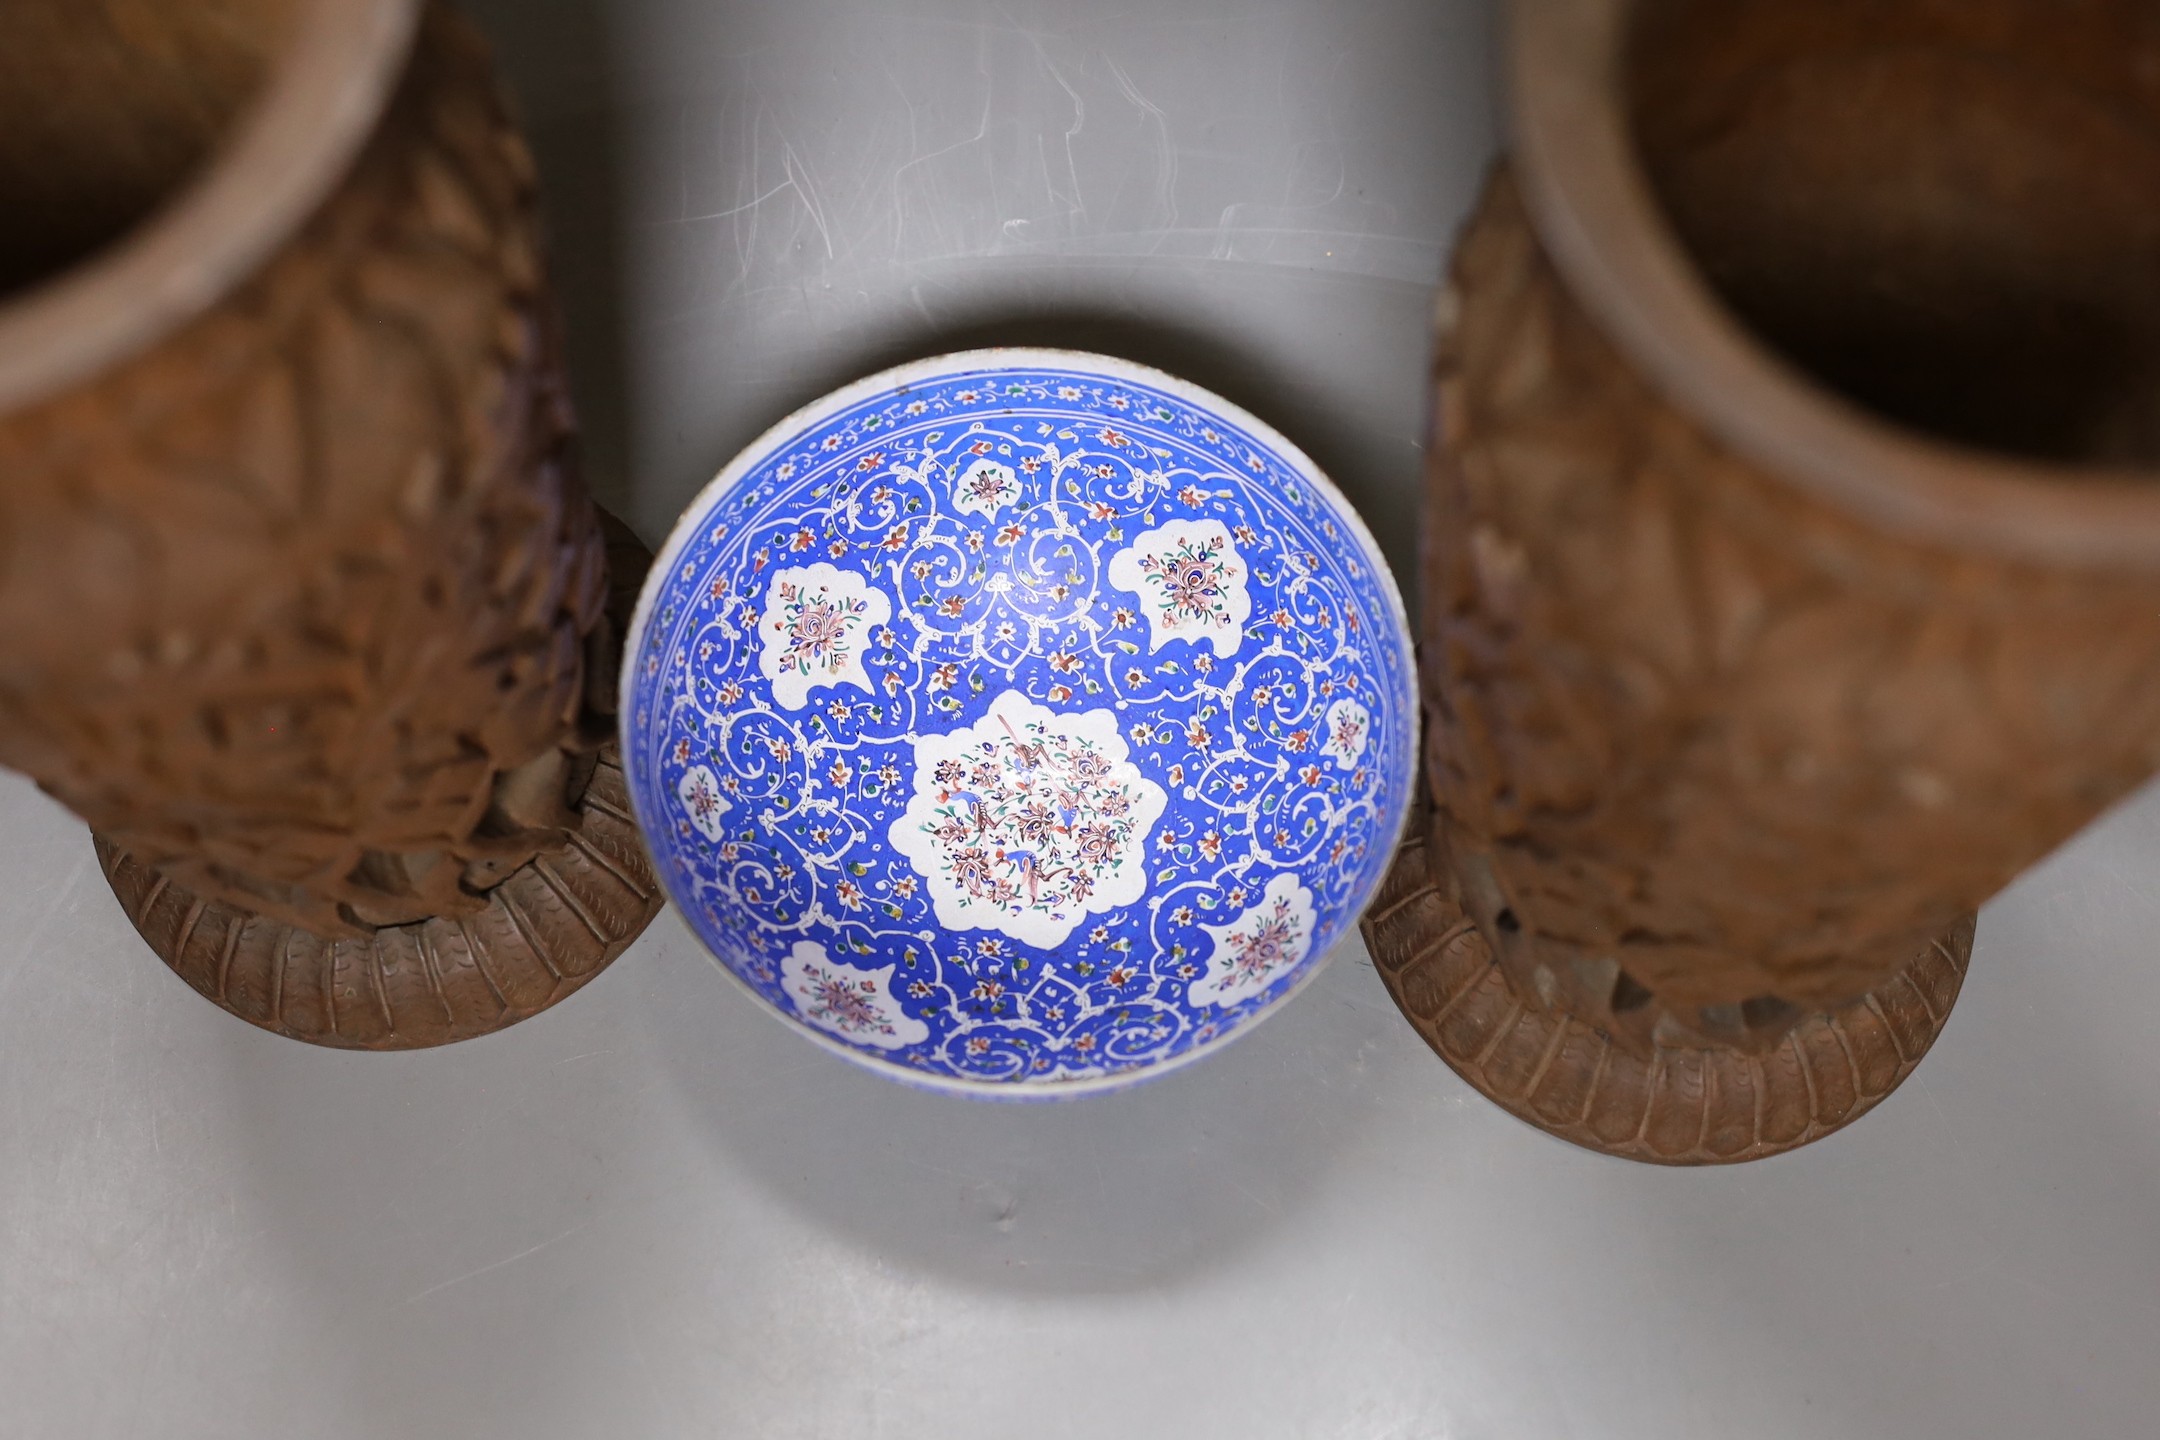 A pair of Indian carved wood vases, 22.5cm high, and a Persian blue enamel bowl (3)